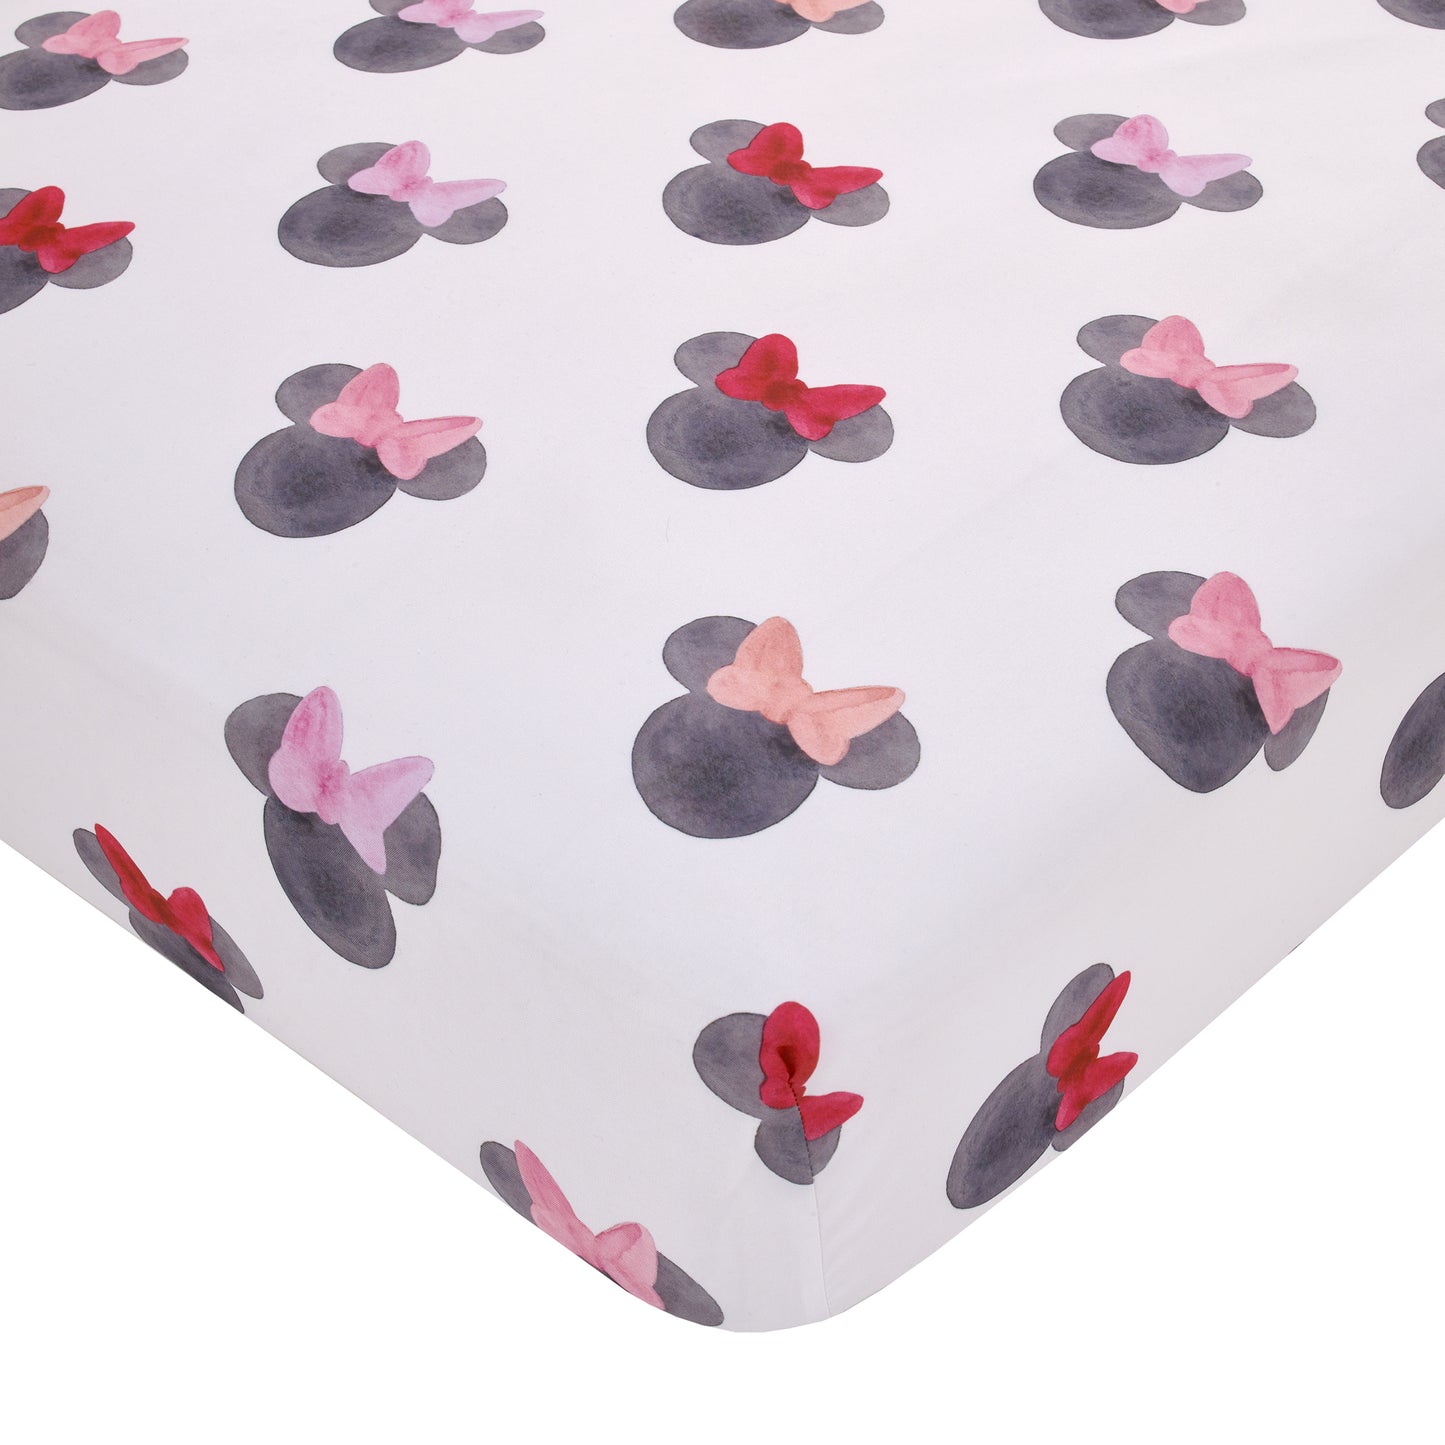 Disney Minnie Mouse - Black, White, Red and Pink Watercolor Minnie Ears Nursery Fitted Mini Crib Sheet